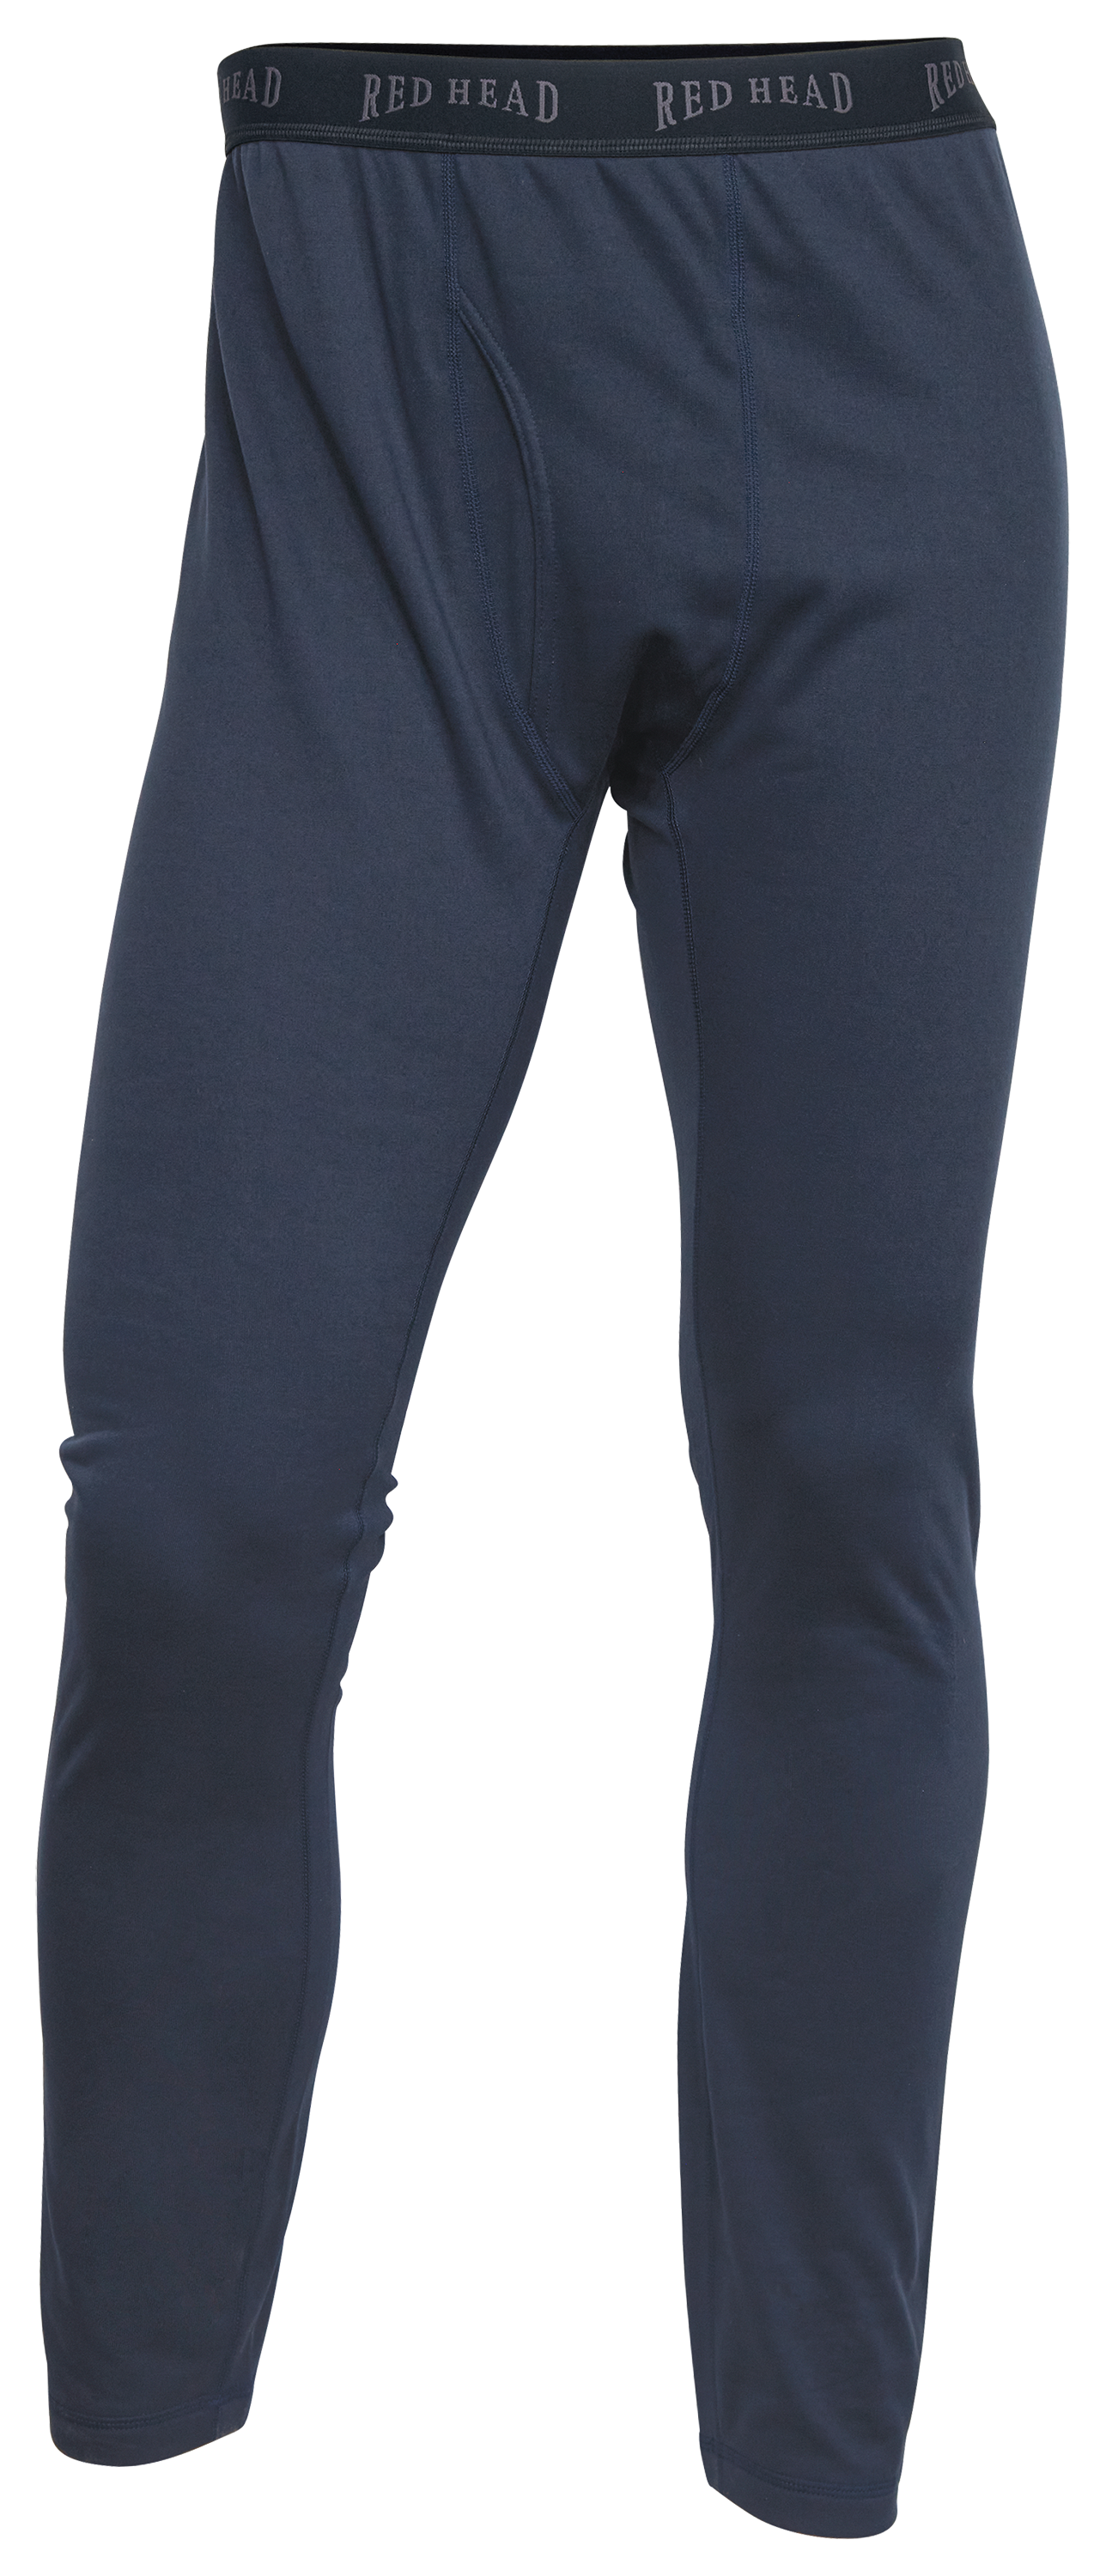 Cabela's Instinct Thermal Zones Pants with 4MOST INHIBIT for Men